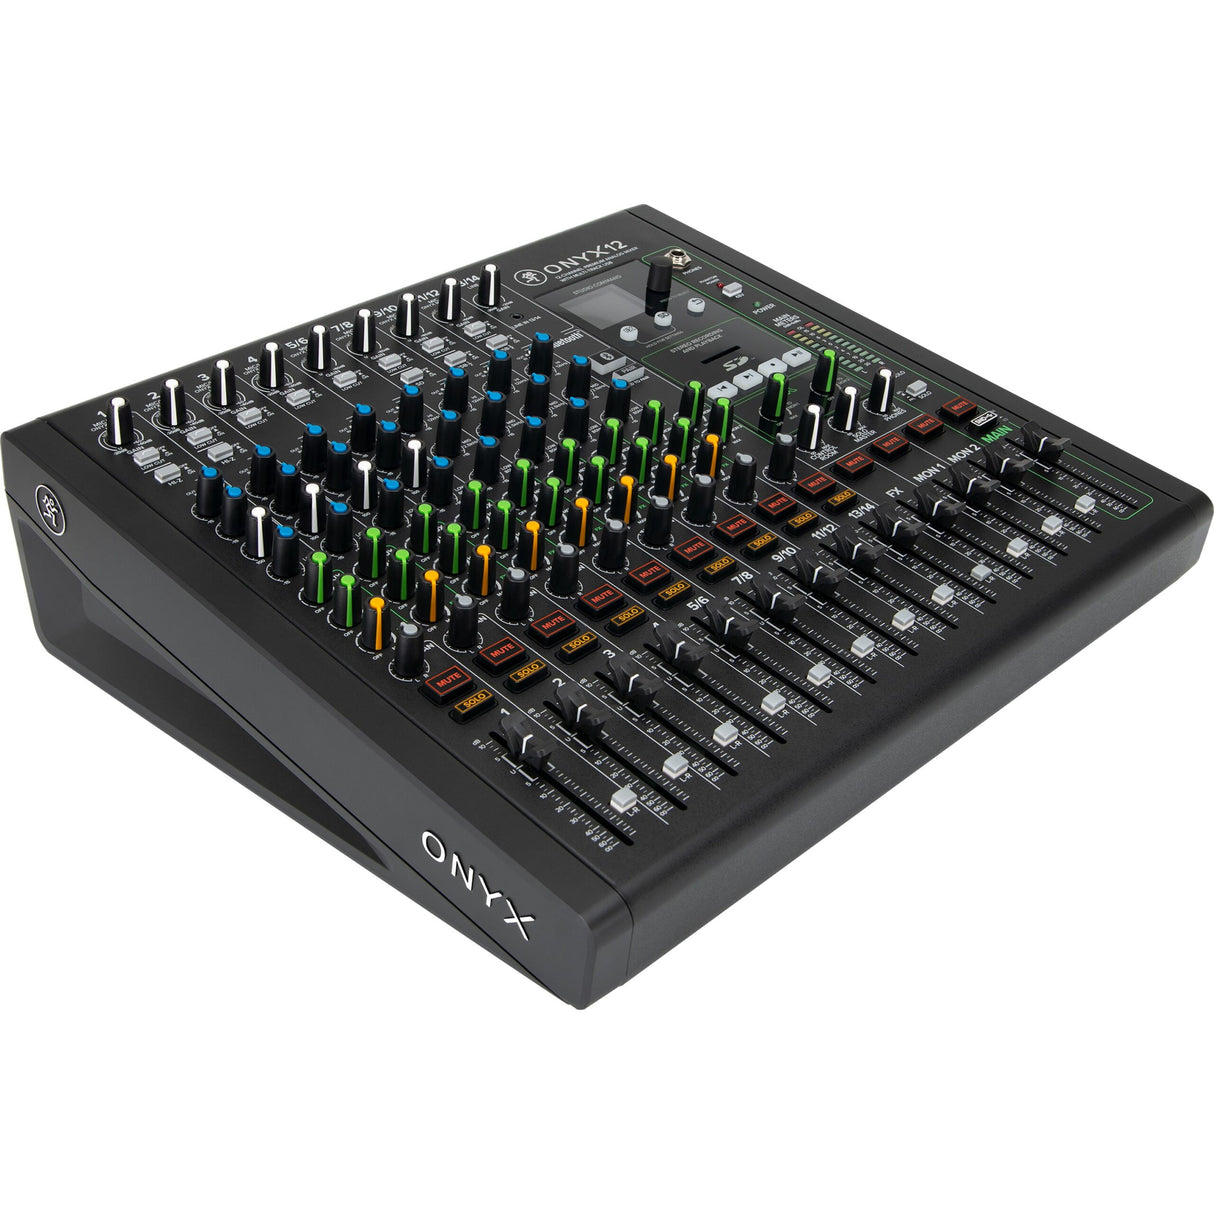 Mackie Onyx12 12-Channel Analog Mixer with Multi-Track USB